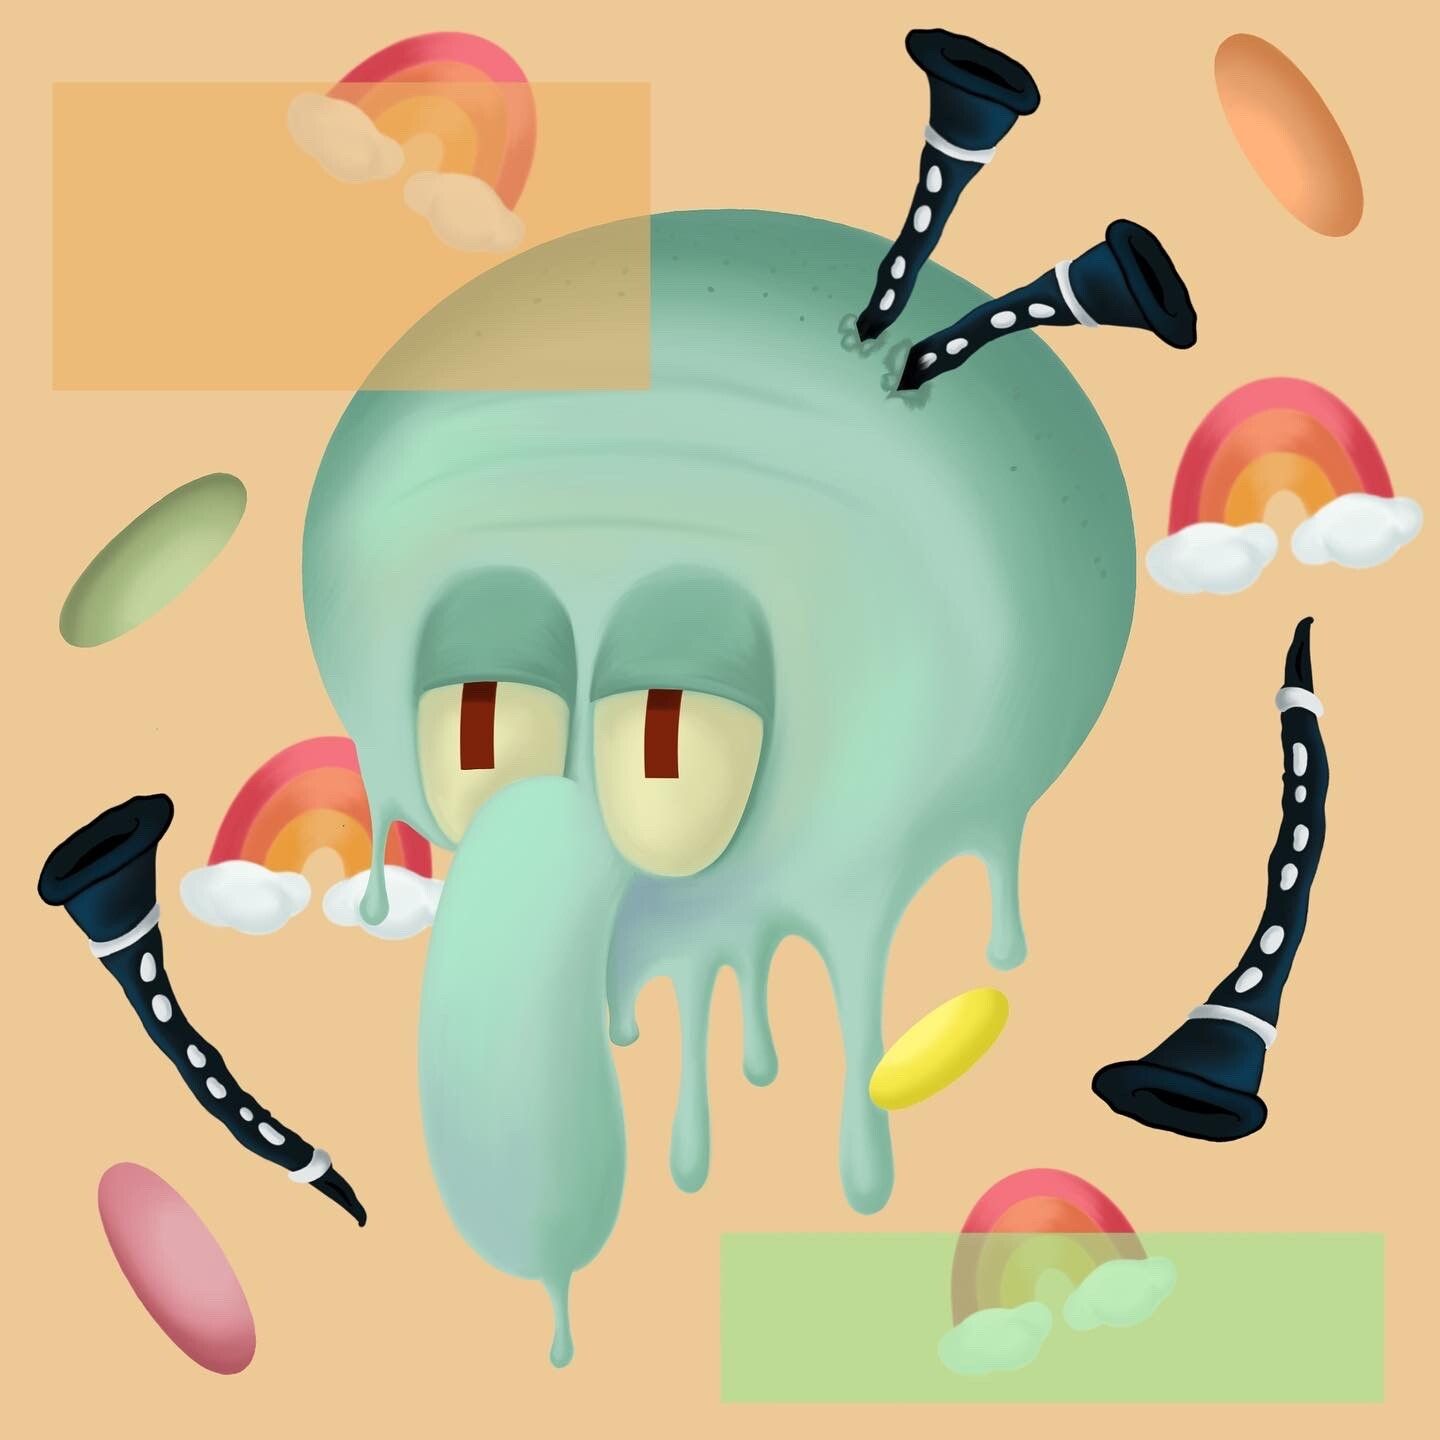 A cartoon character with candy and other items - Squidward